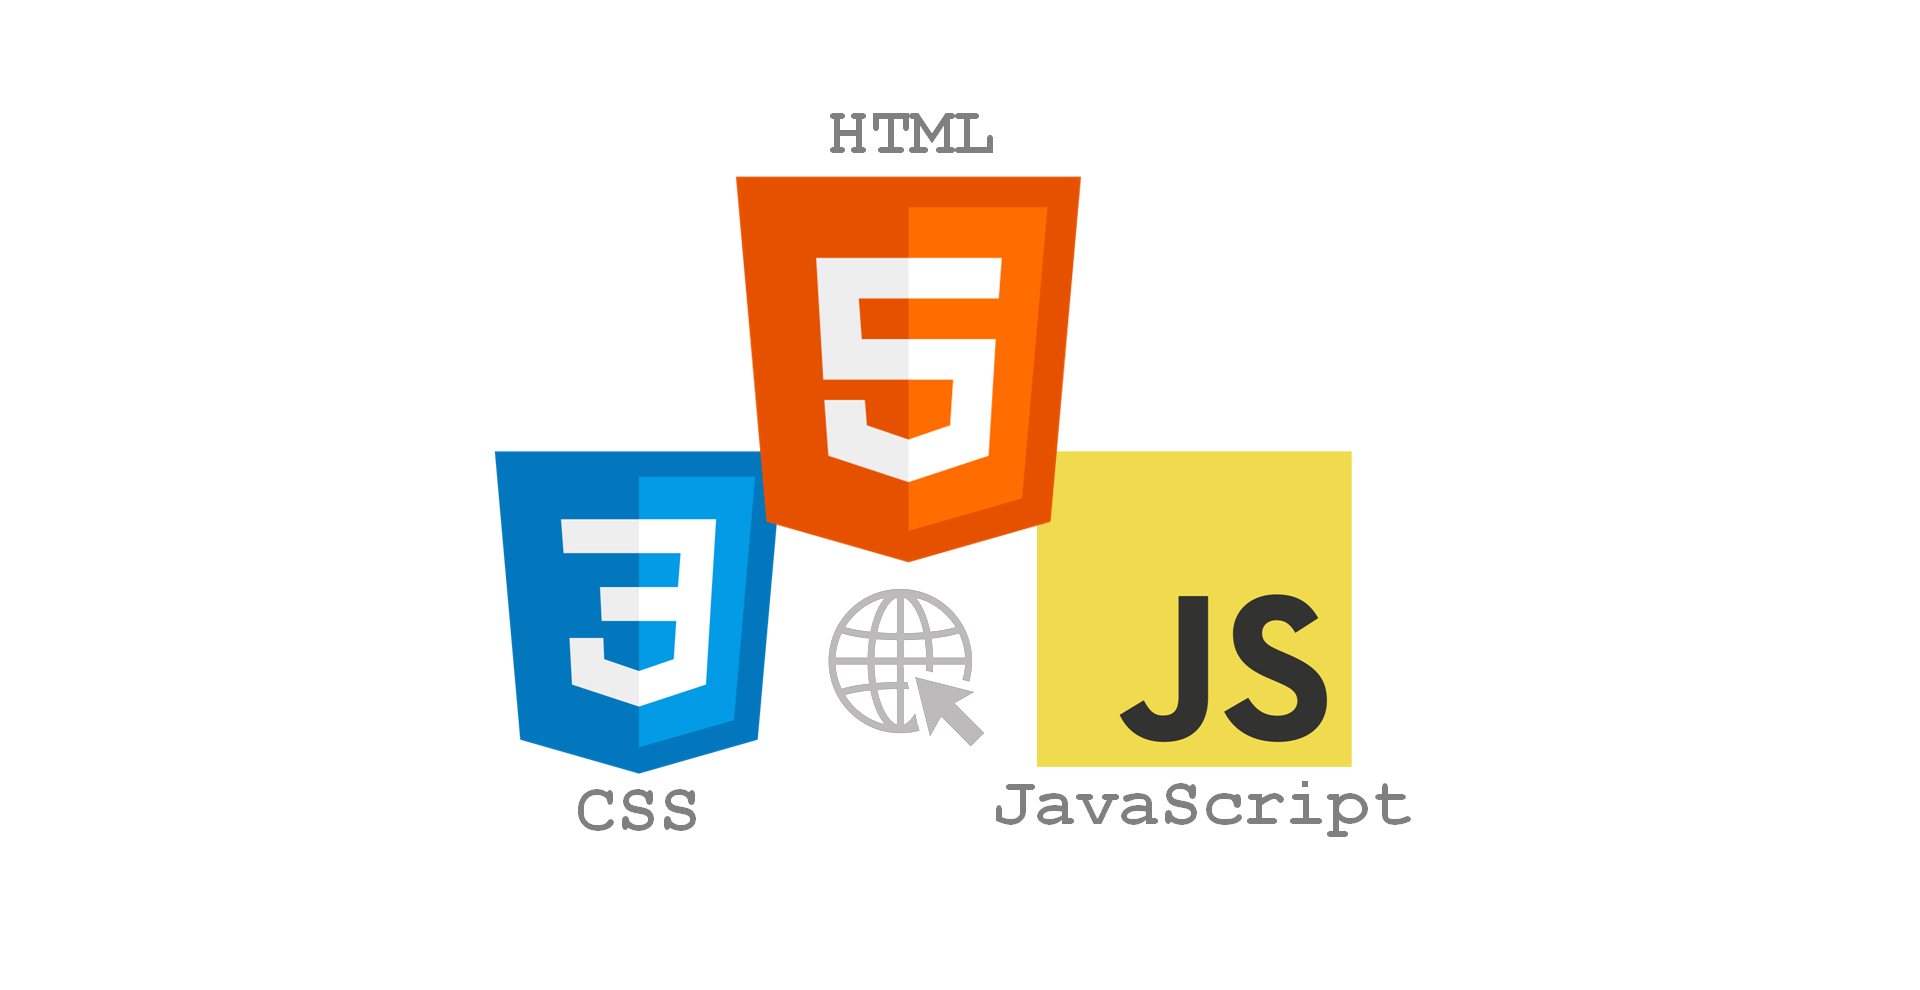 HTML, CSS, and JS as a Framework